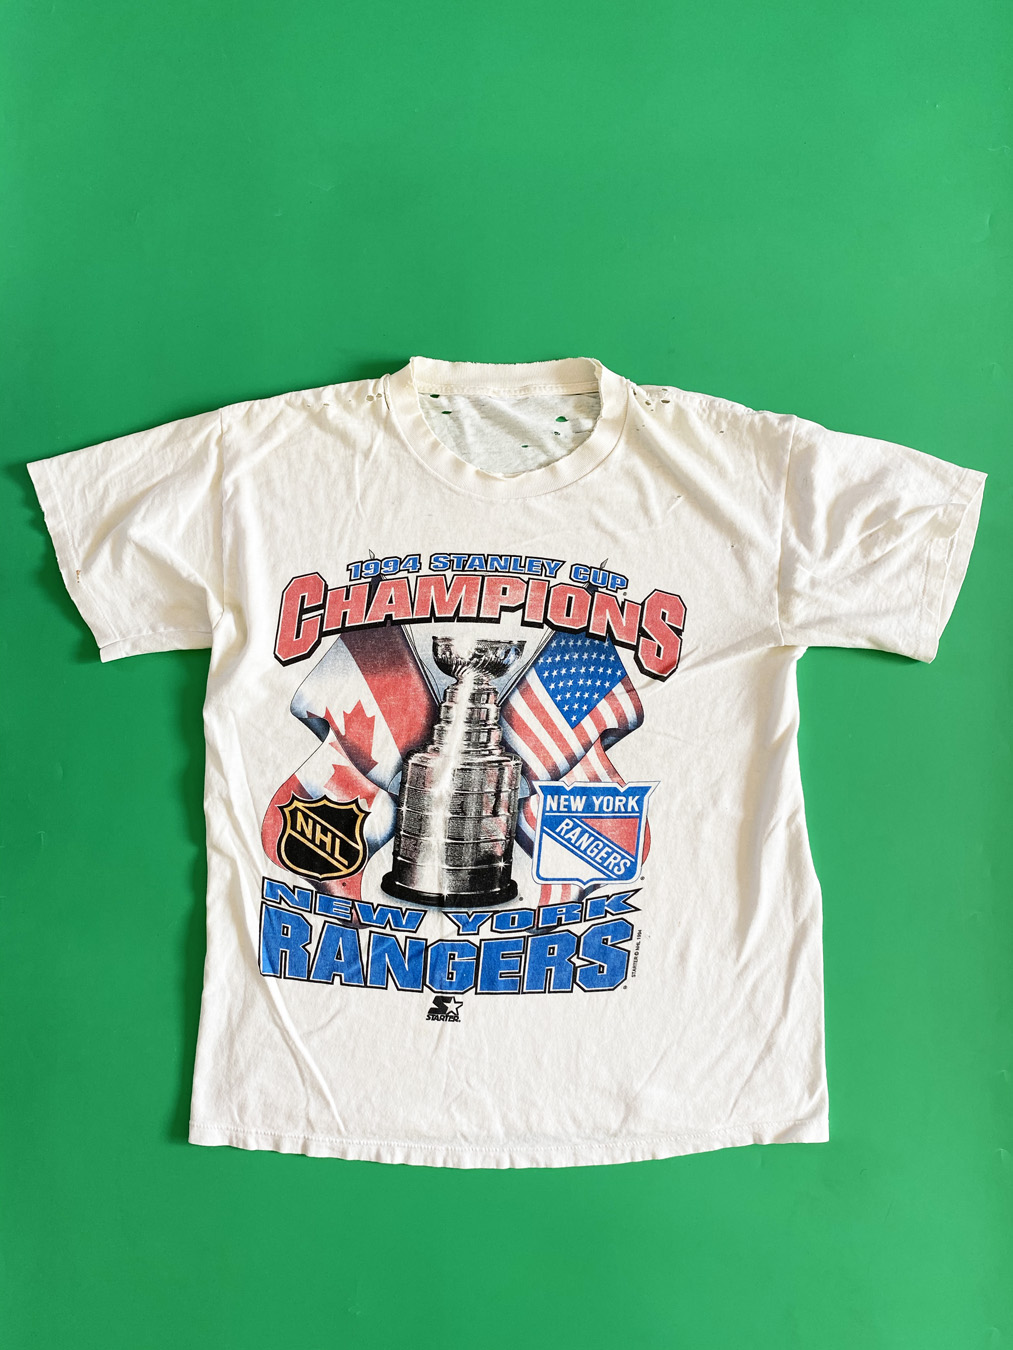 Vintage 1994 New York Rangers Stanley Cup Champions T-Shirt, 90s